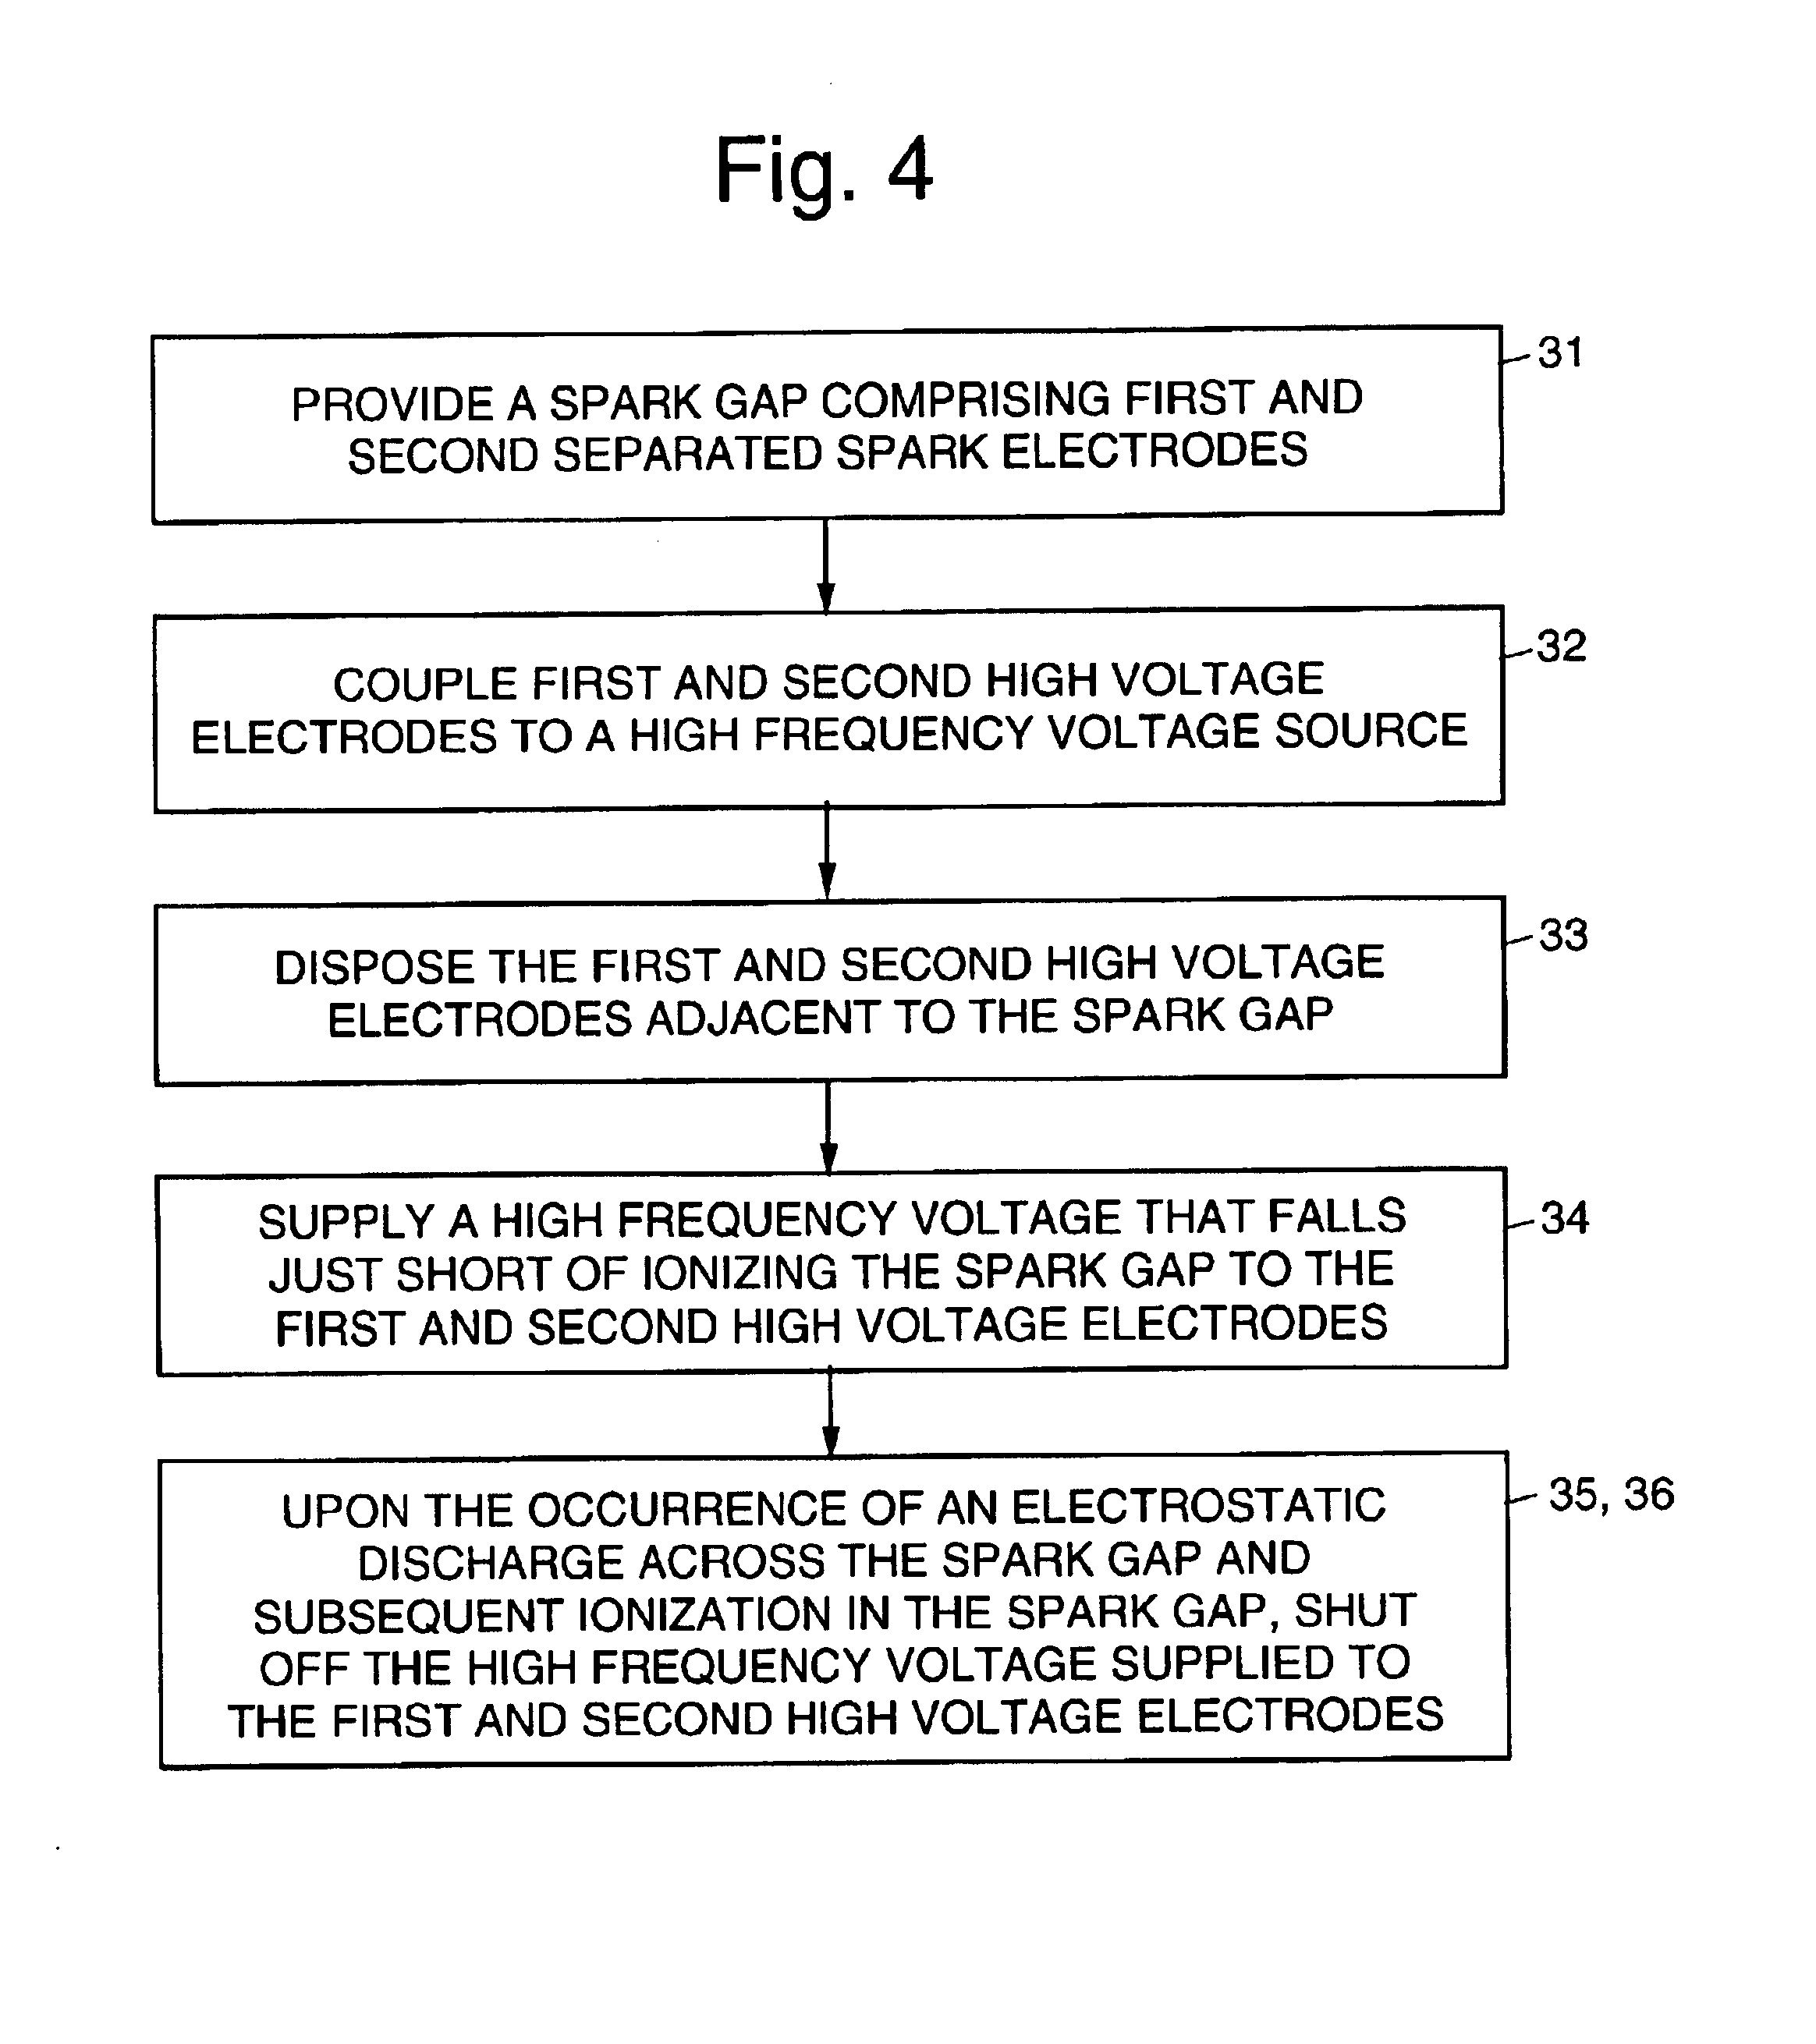 Electrostatic discharge protection apparatus and method employing a high frequency noncoupled starter circuit